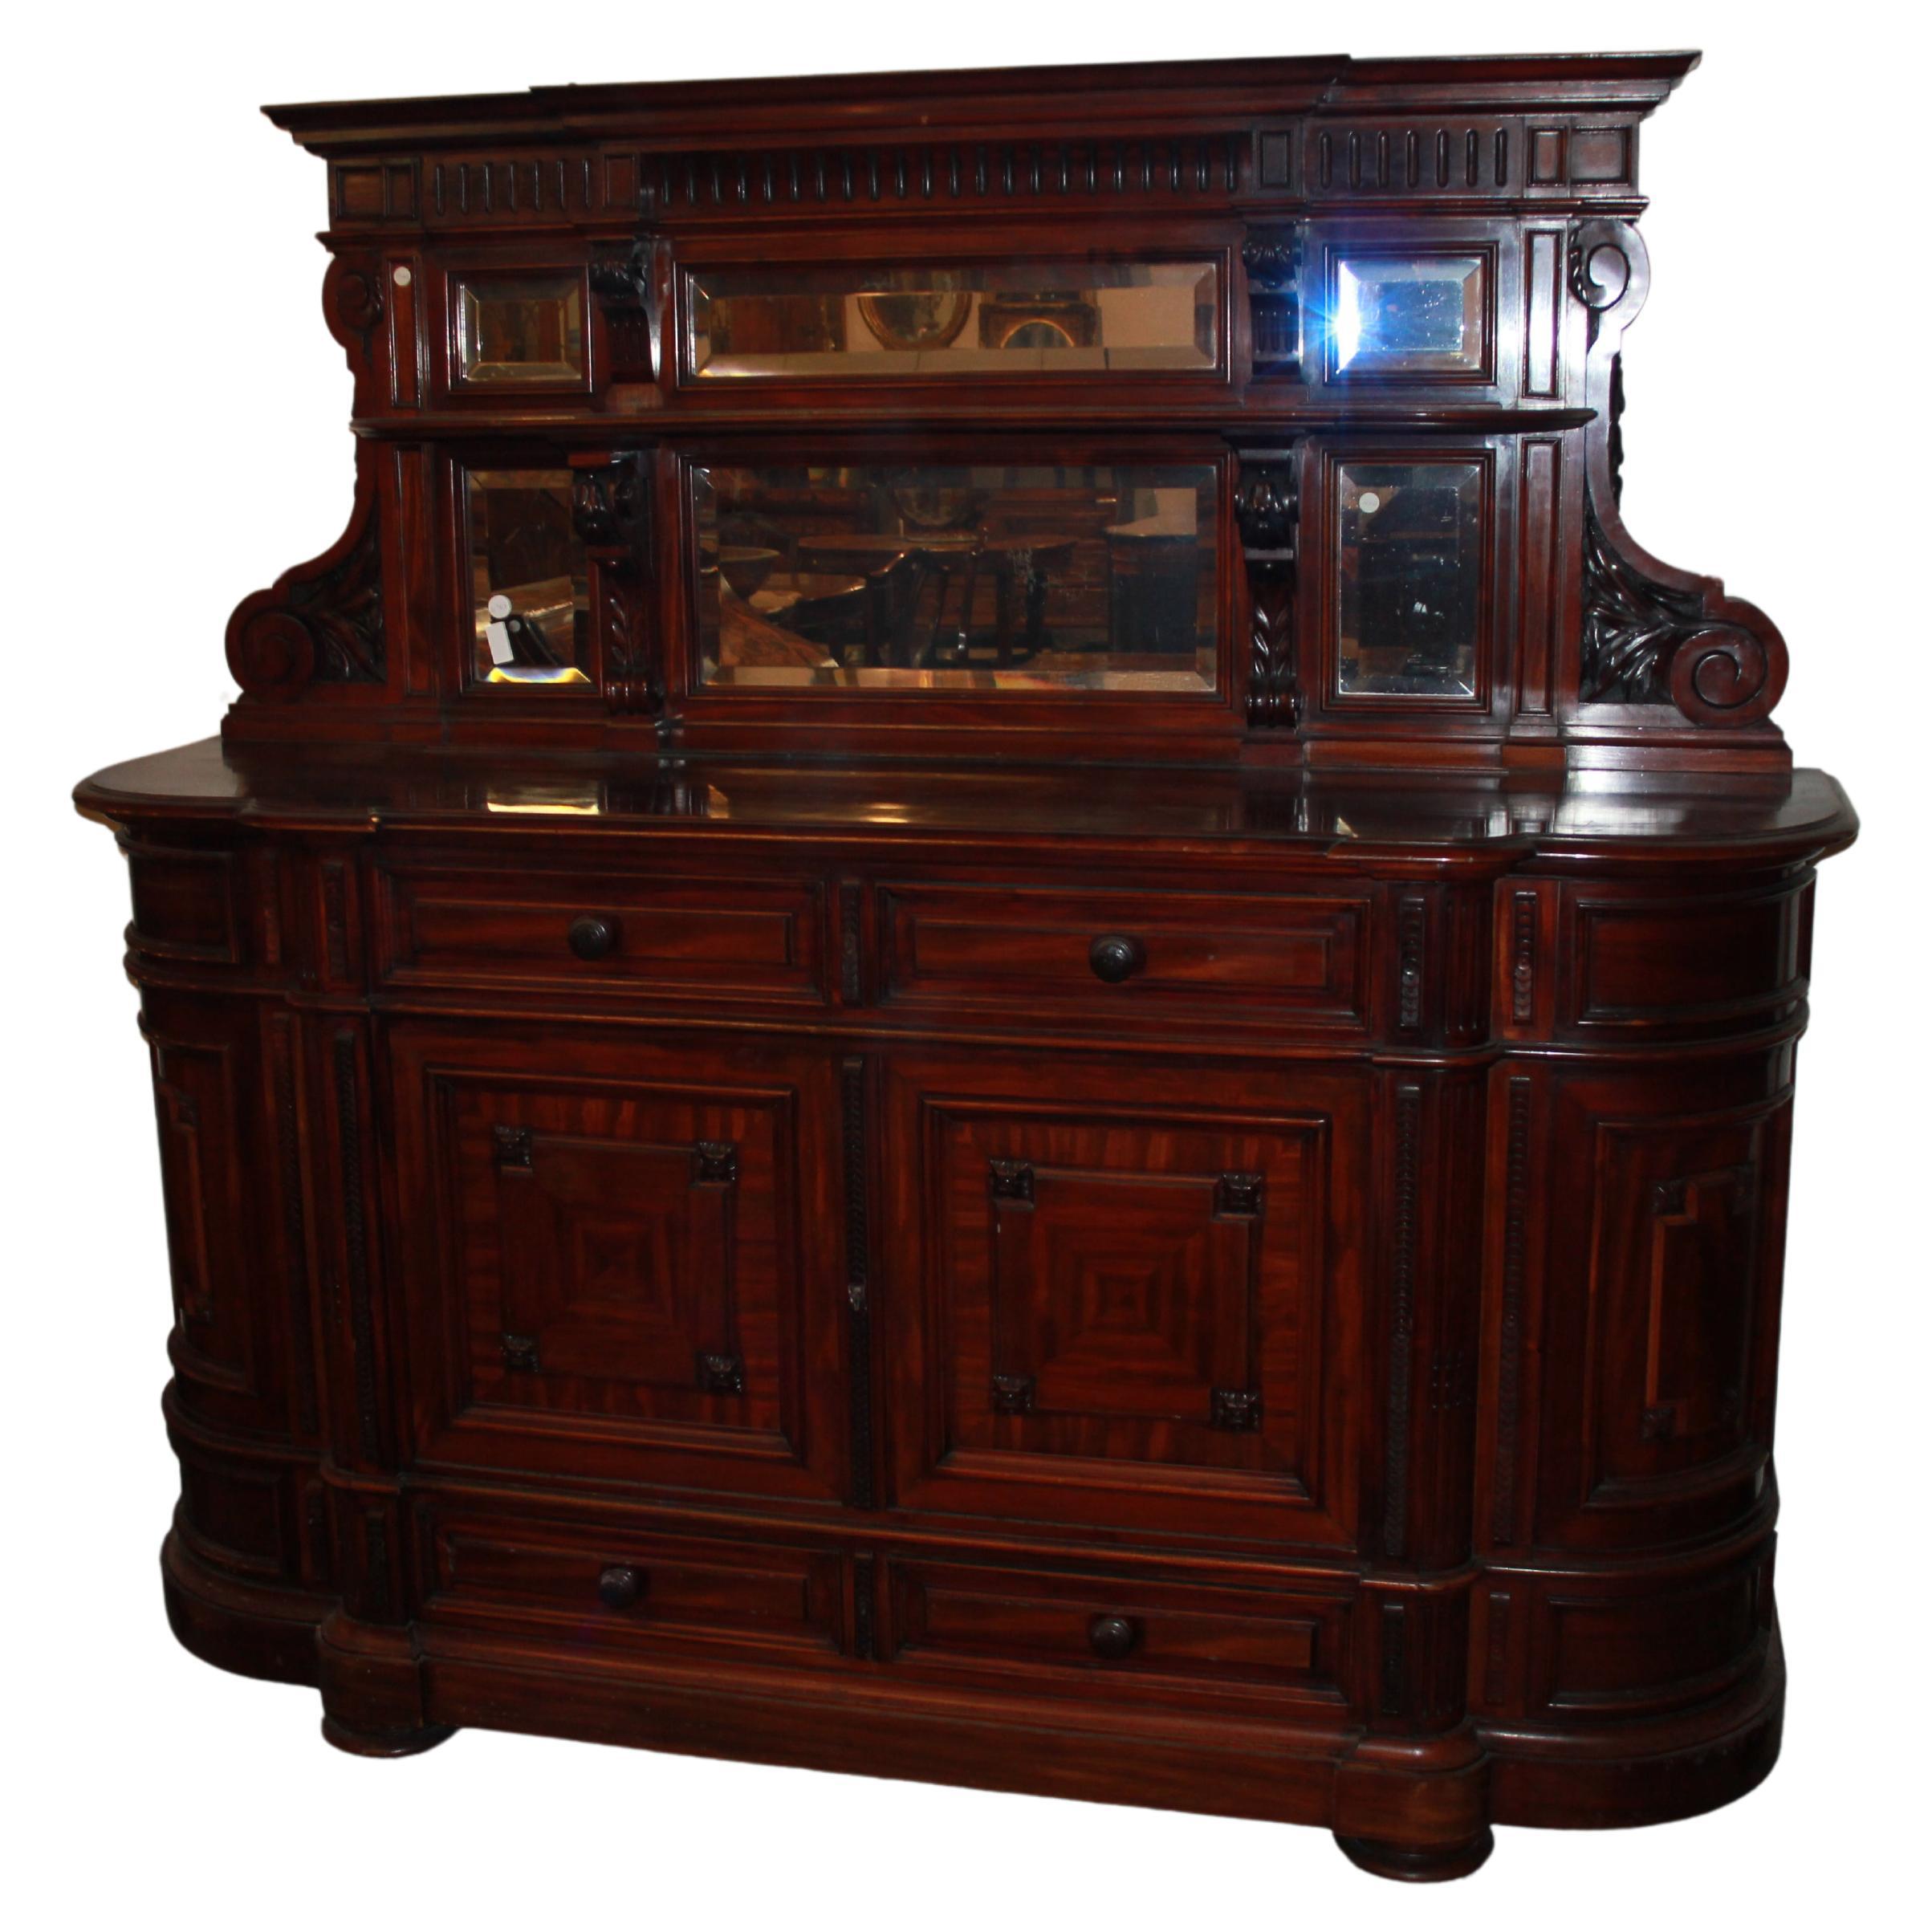  Pair of large mid-1800s mahogany sideboards in the Louis Philippe style For Sale